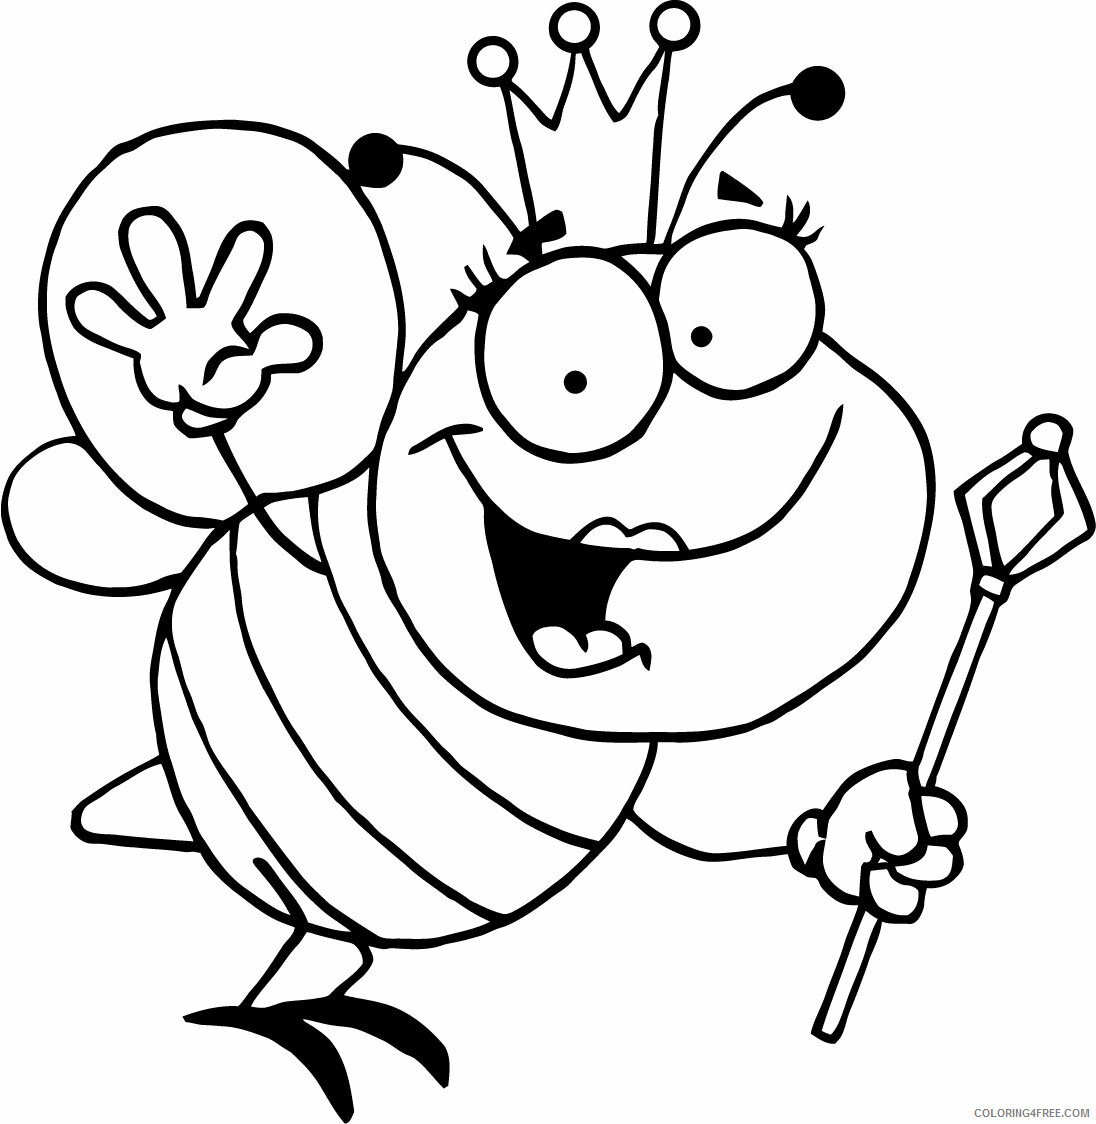 Bee Coloring Pages Animal Printable Sheets Bumble Bee For Kids 2021 0390 Coloring4free